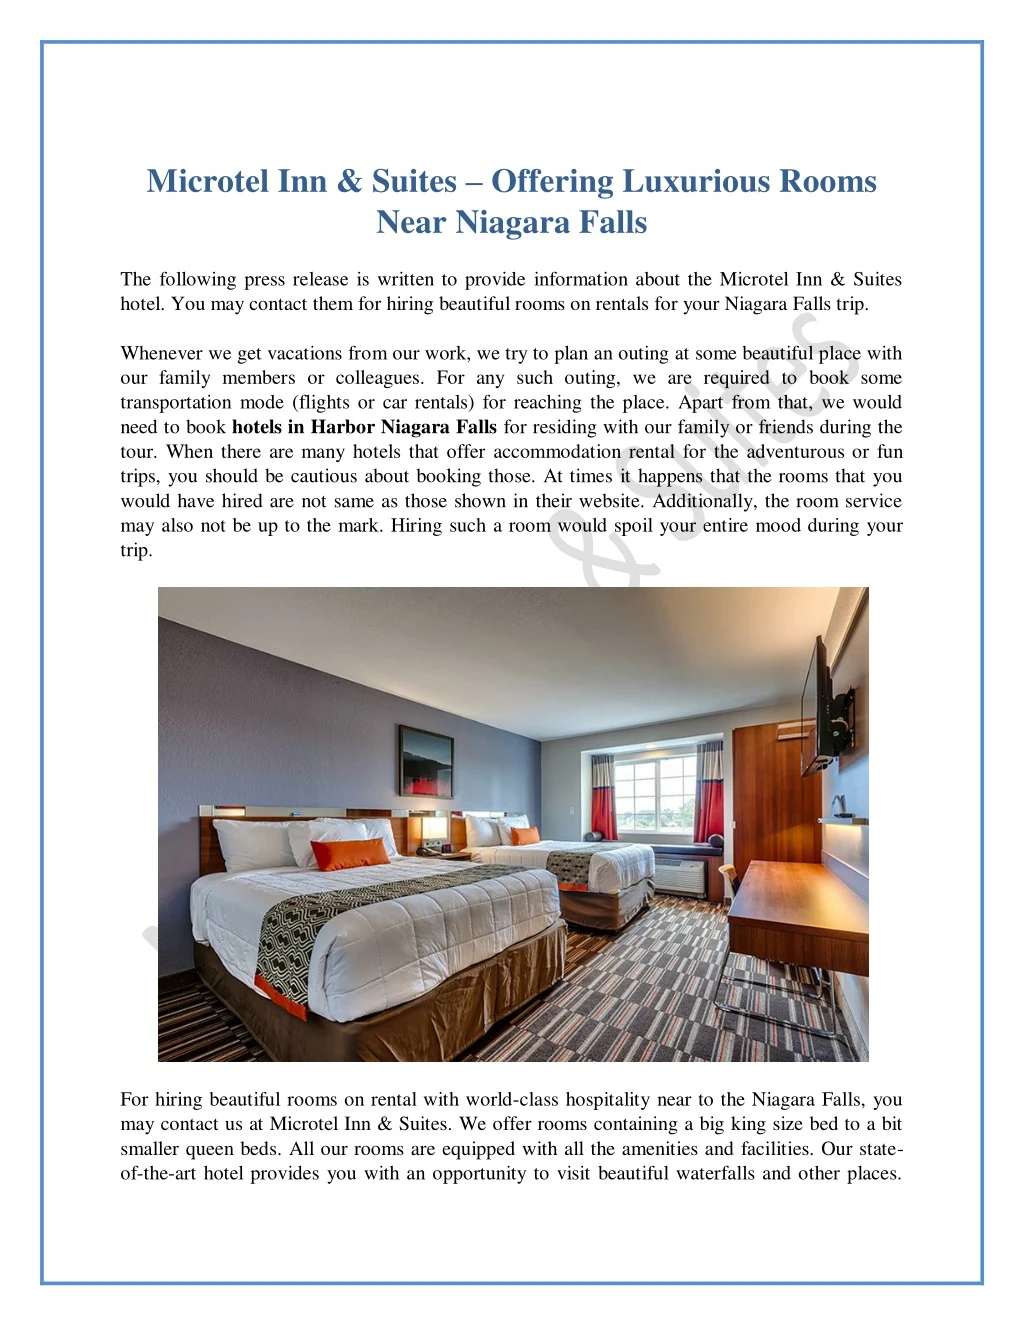 microtel inn suites offering luxurious rooms near